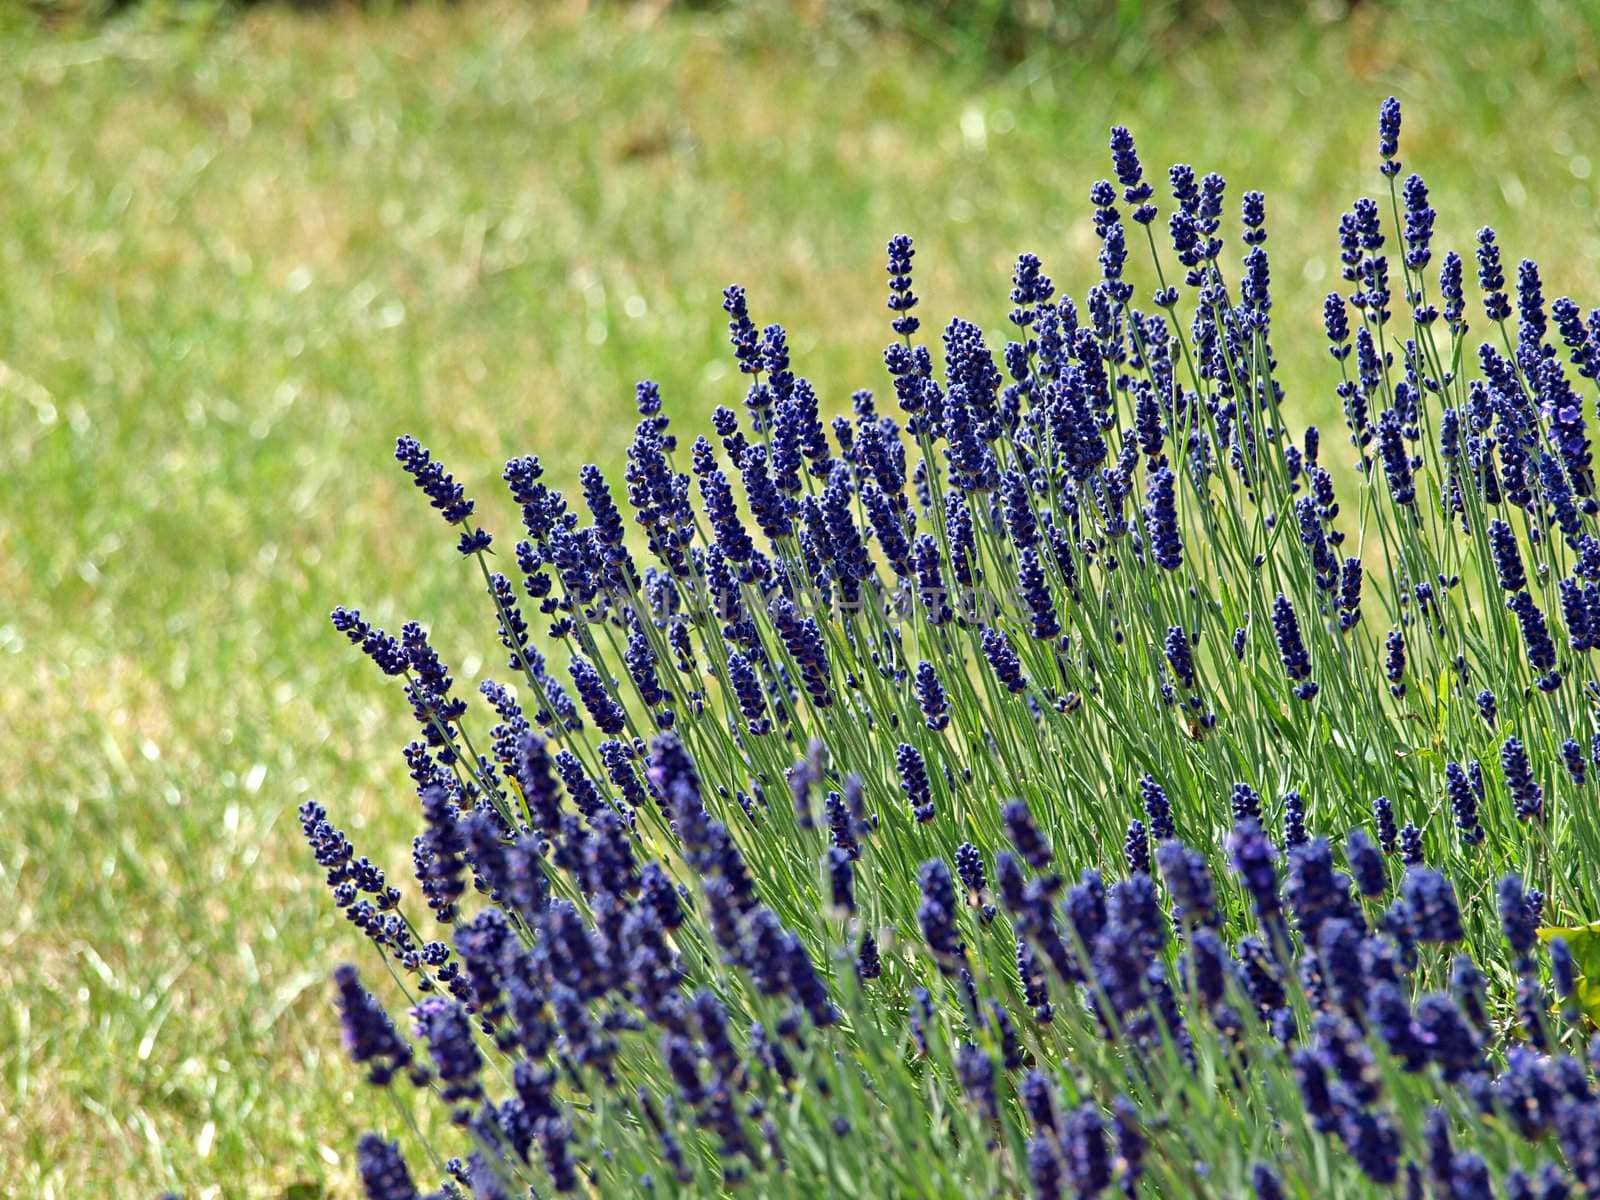 Blooming Lavender flowers in France by Ronyzmbow